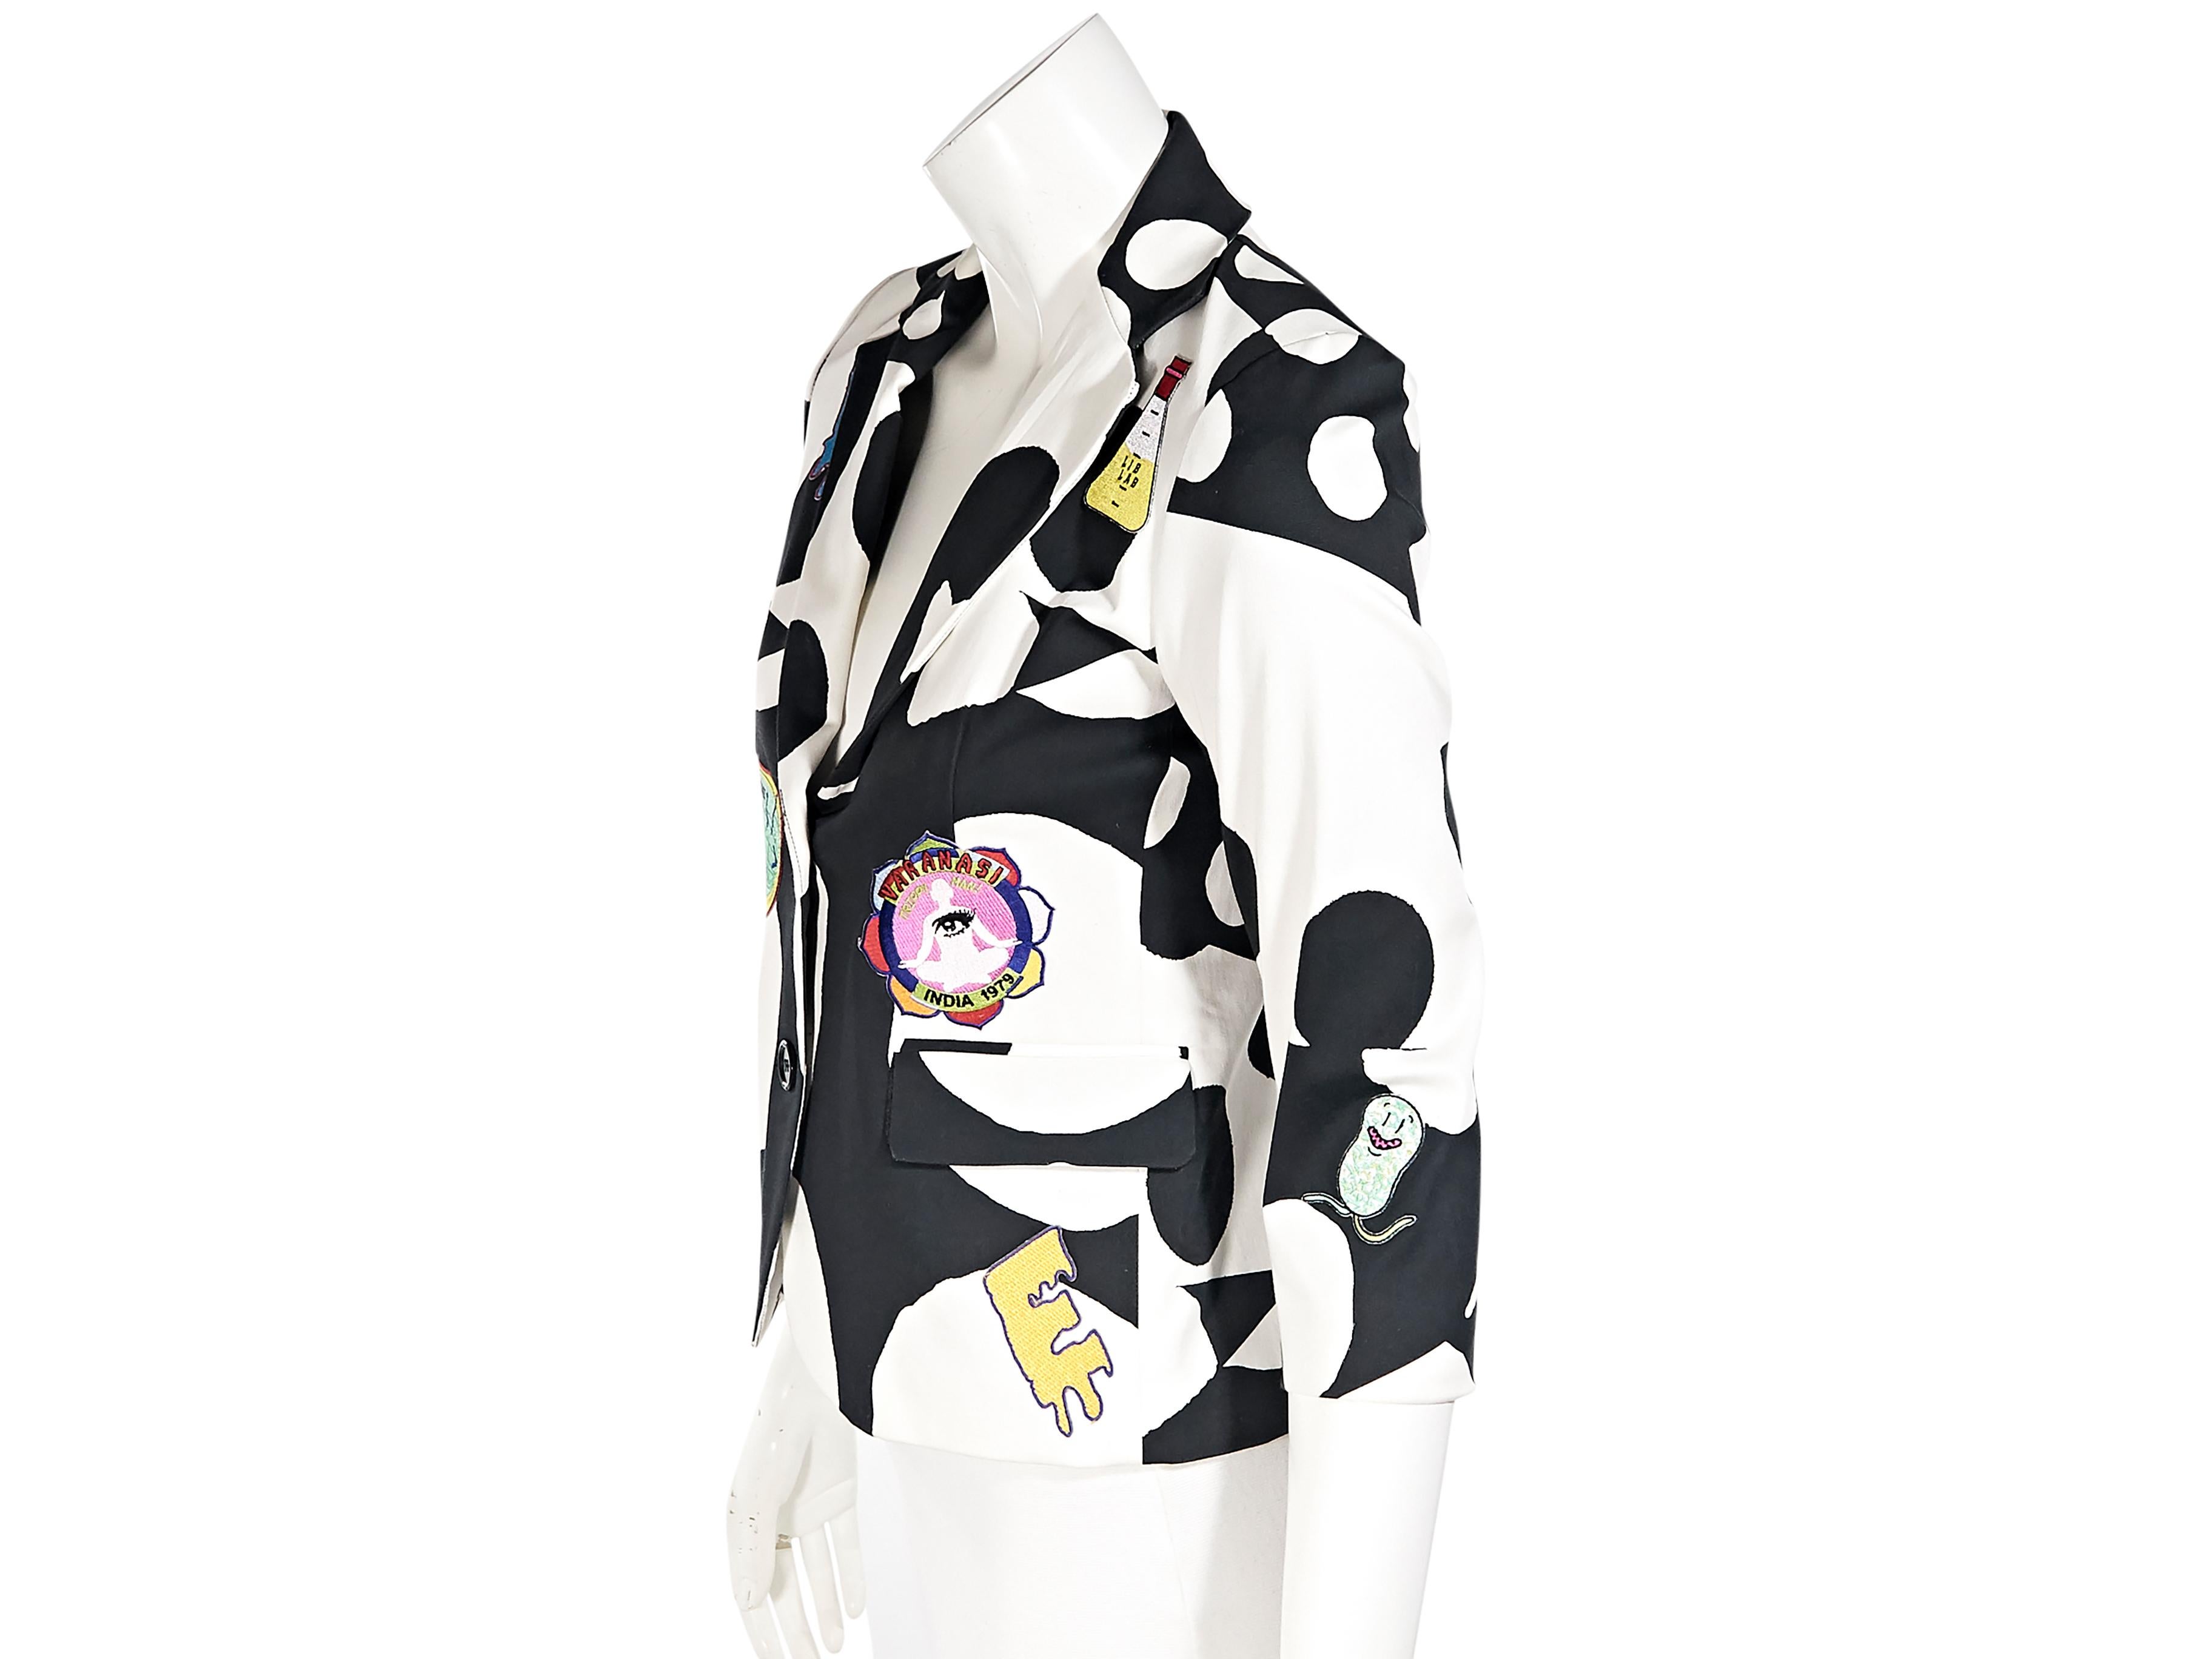 Product details:  Black and white printed blazer by Libertine.  Accented with multicolor patches.  Notched lapel.  Three-quarter length sleeves.  Button-front closure.  Waist flap pockets.  Back center hem pleat.  28